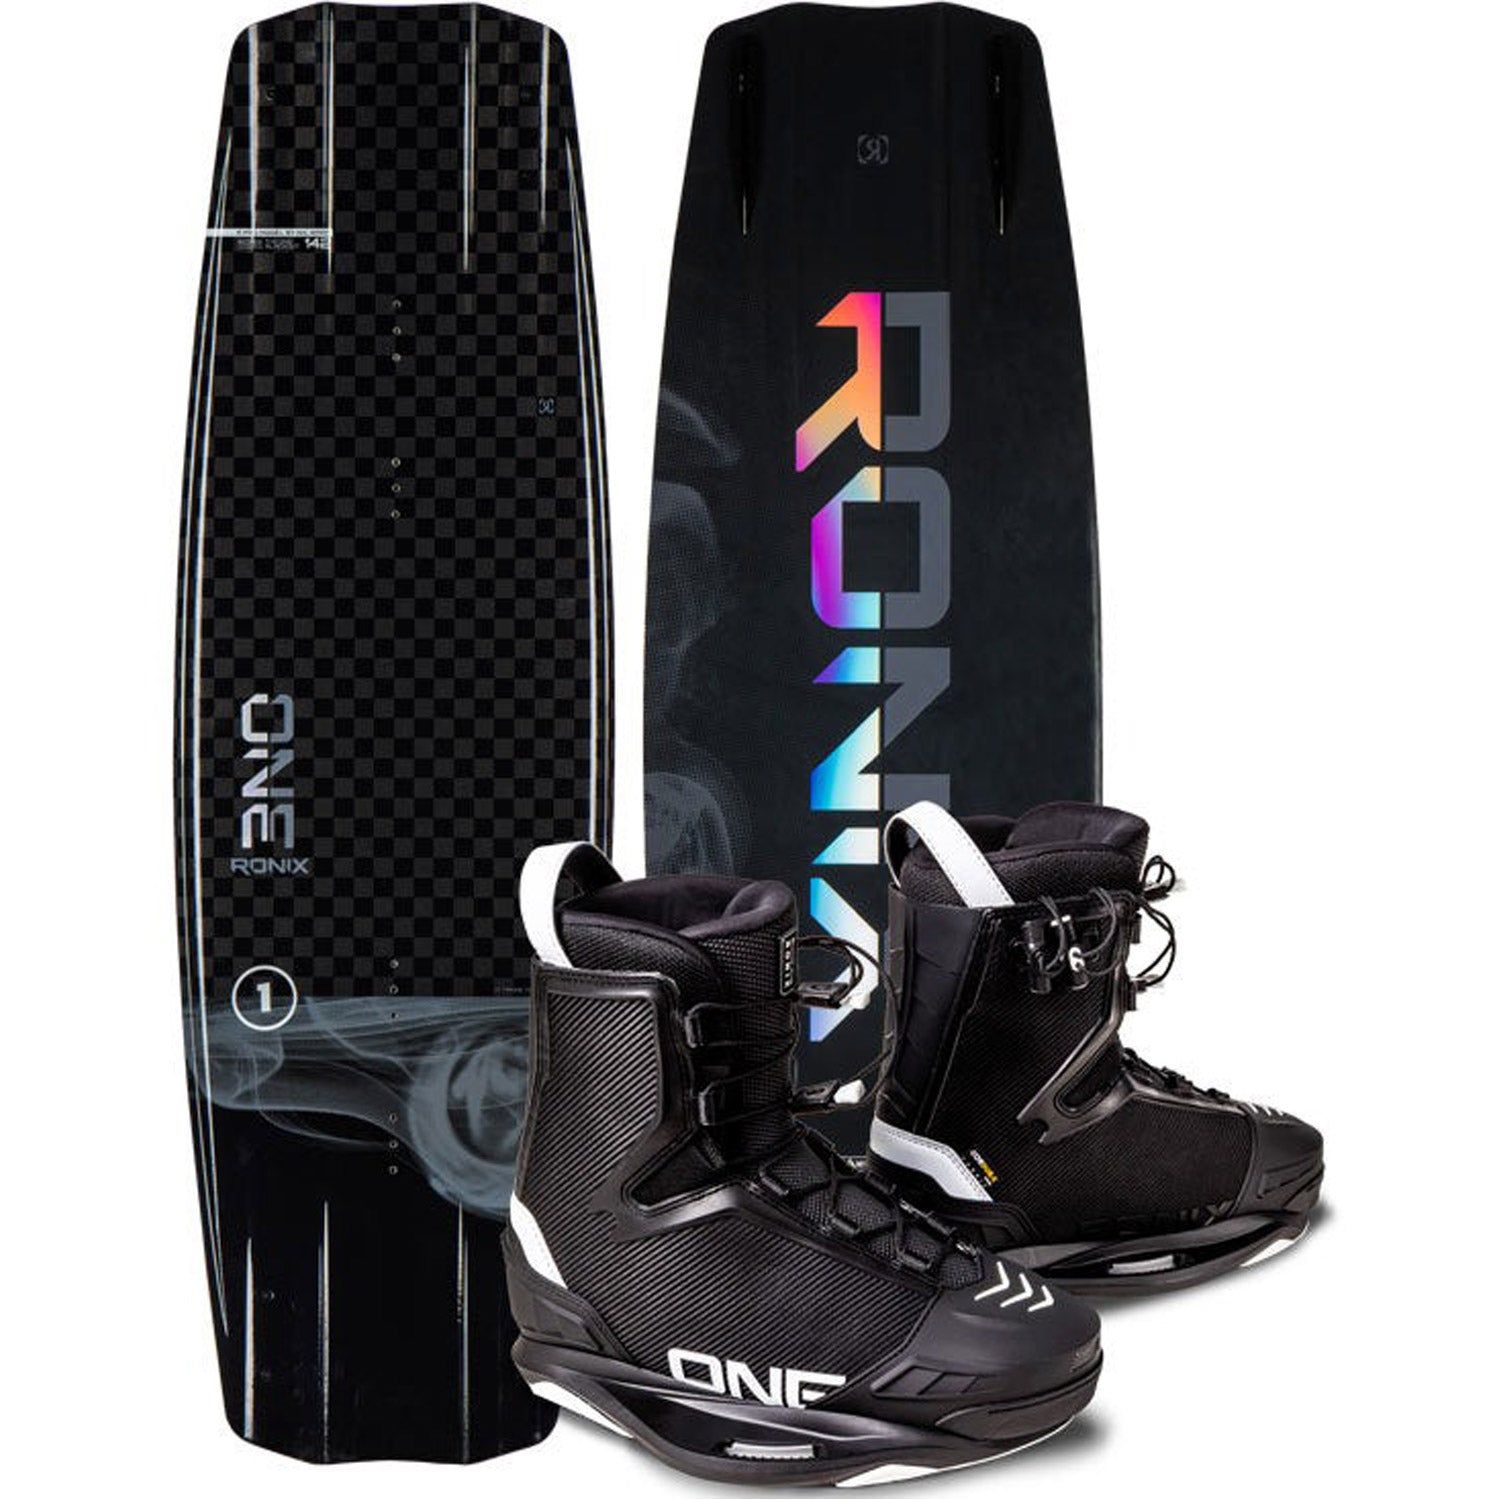 One Blackout Wakeboard w/ One Boot Package